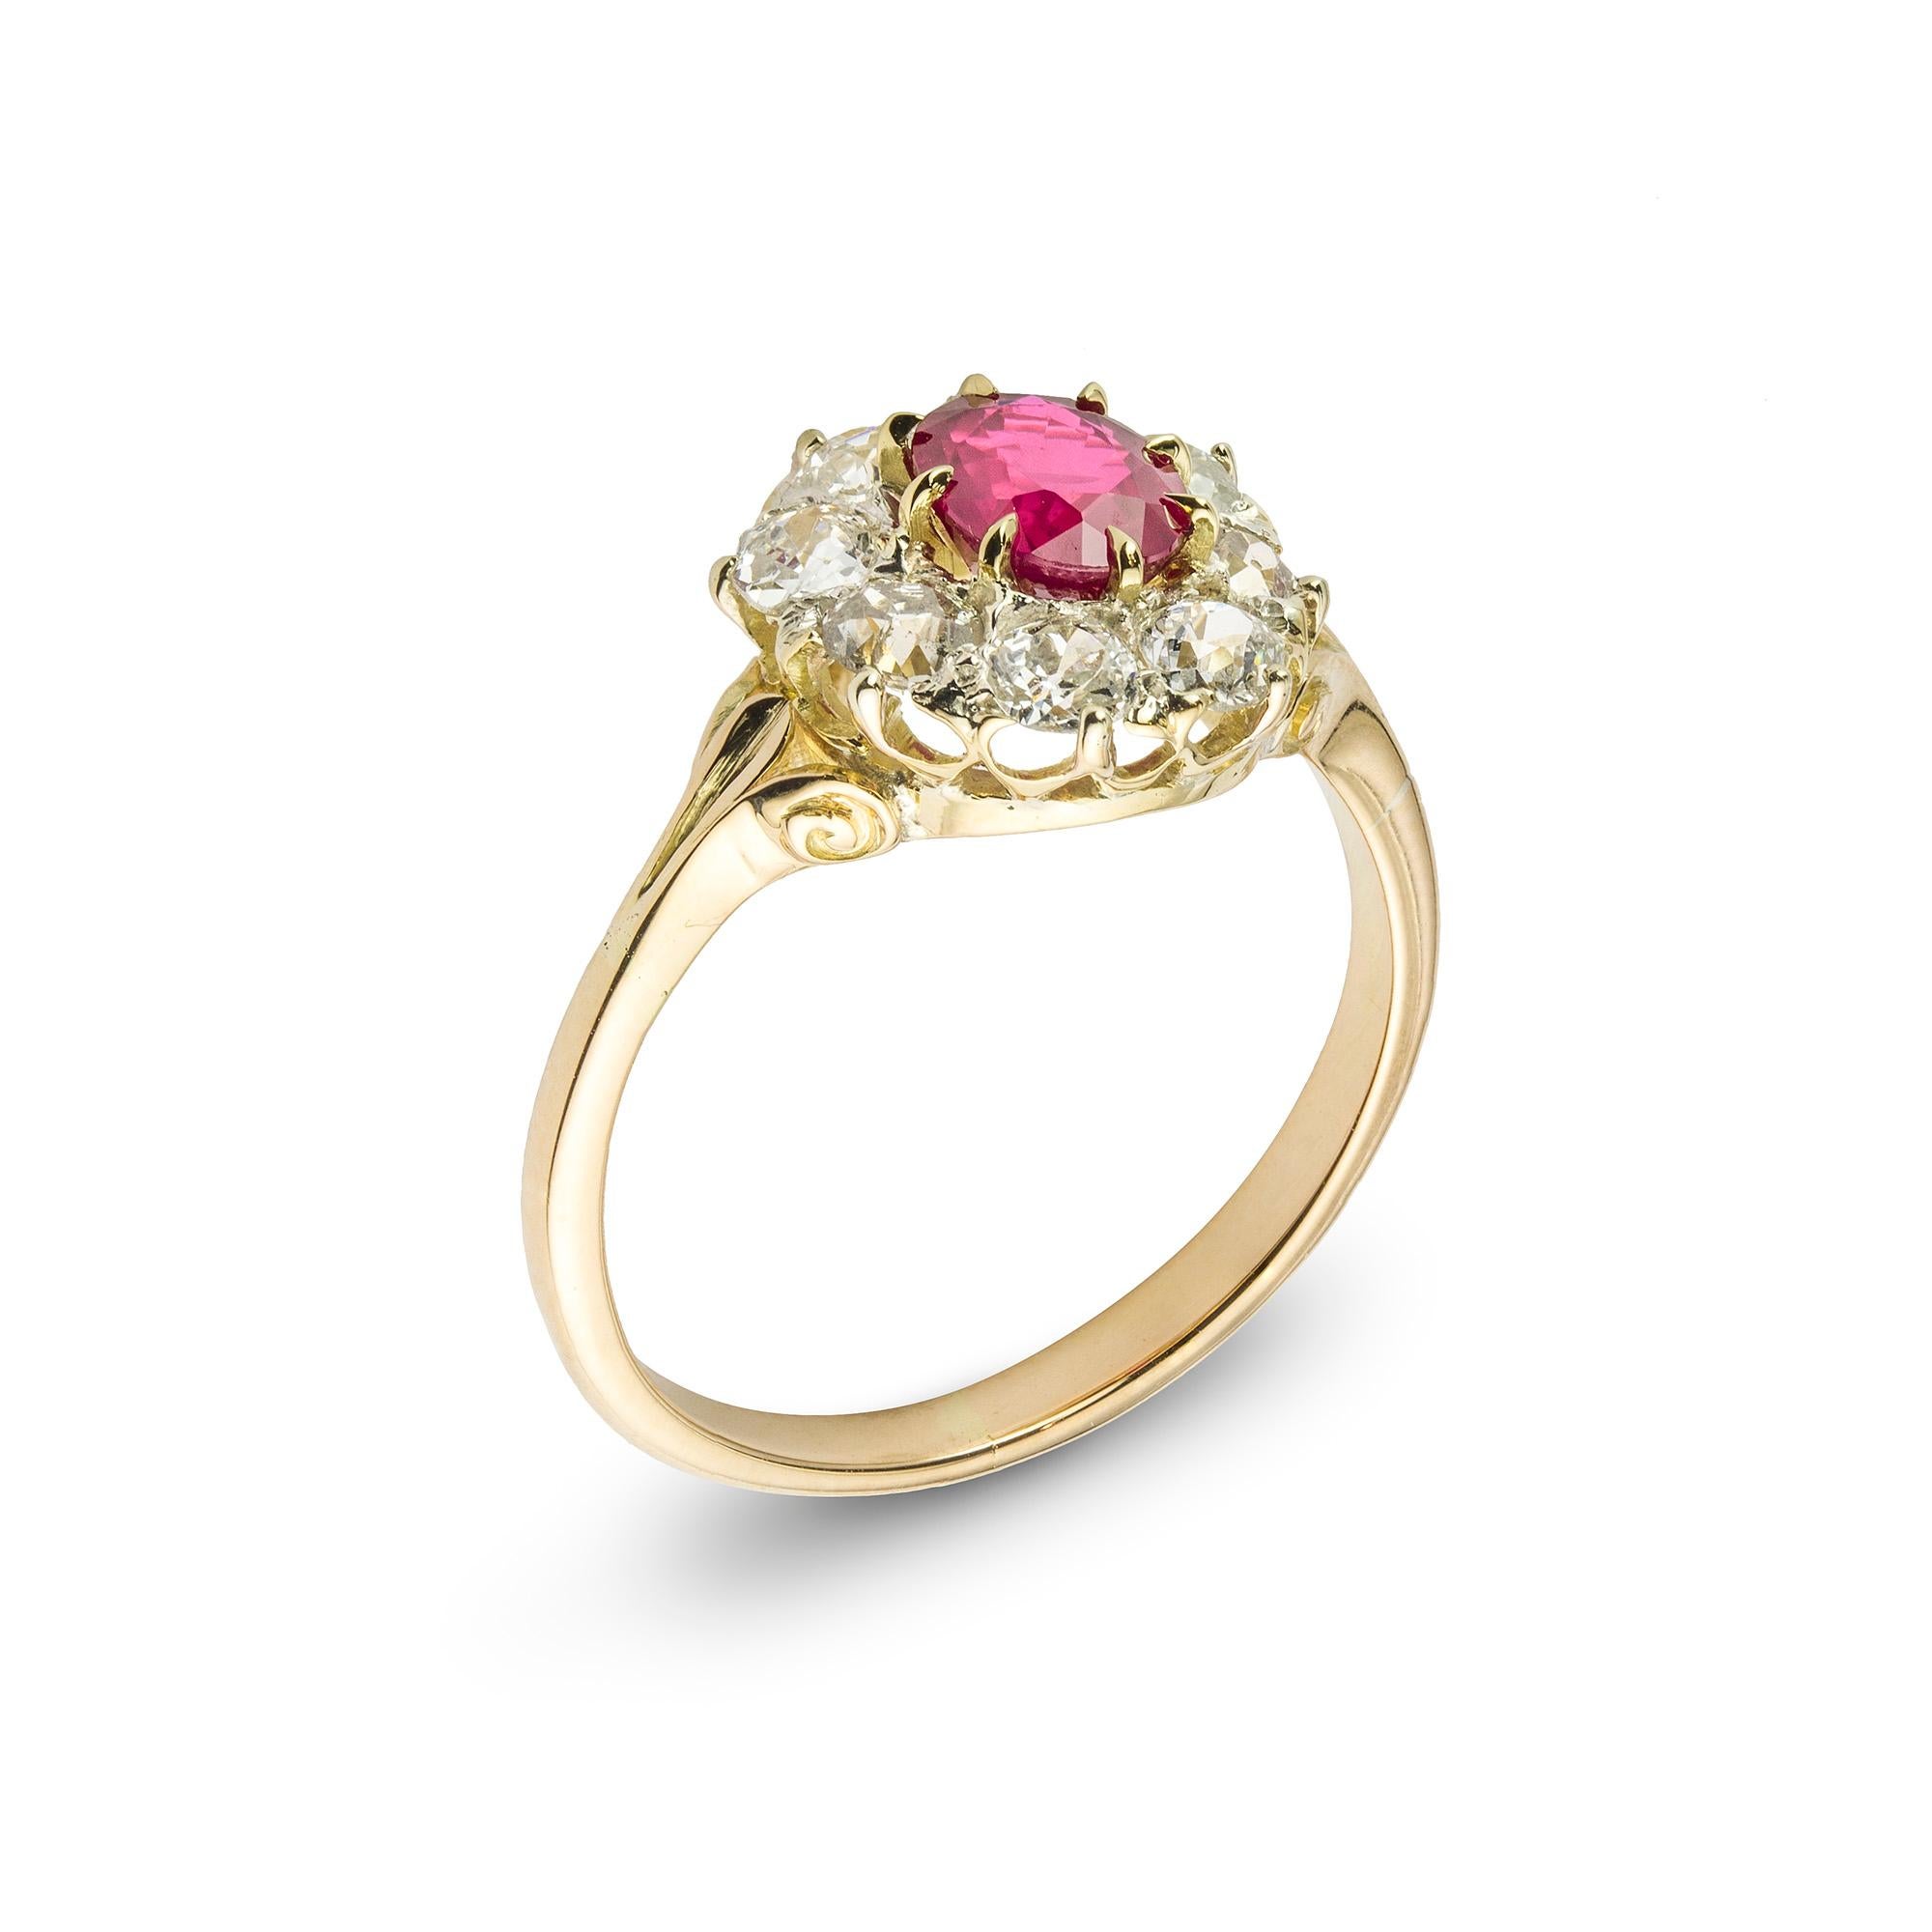 A late Victorian ruby and diamond cluster ring, the oval-cut ruby weighing 1.09 carats of Burmese origin, surrounded by eight old European-cut diamonds estimated to weigh 1 carat in total, all claw-set to a scrolled mount with split shoulders,